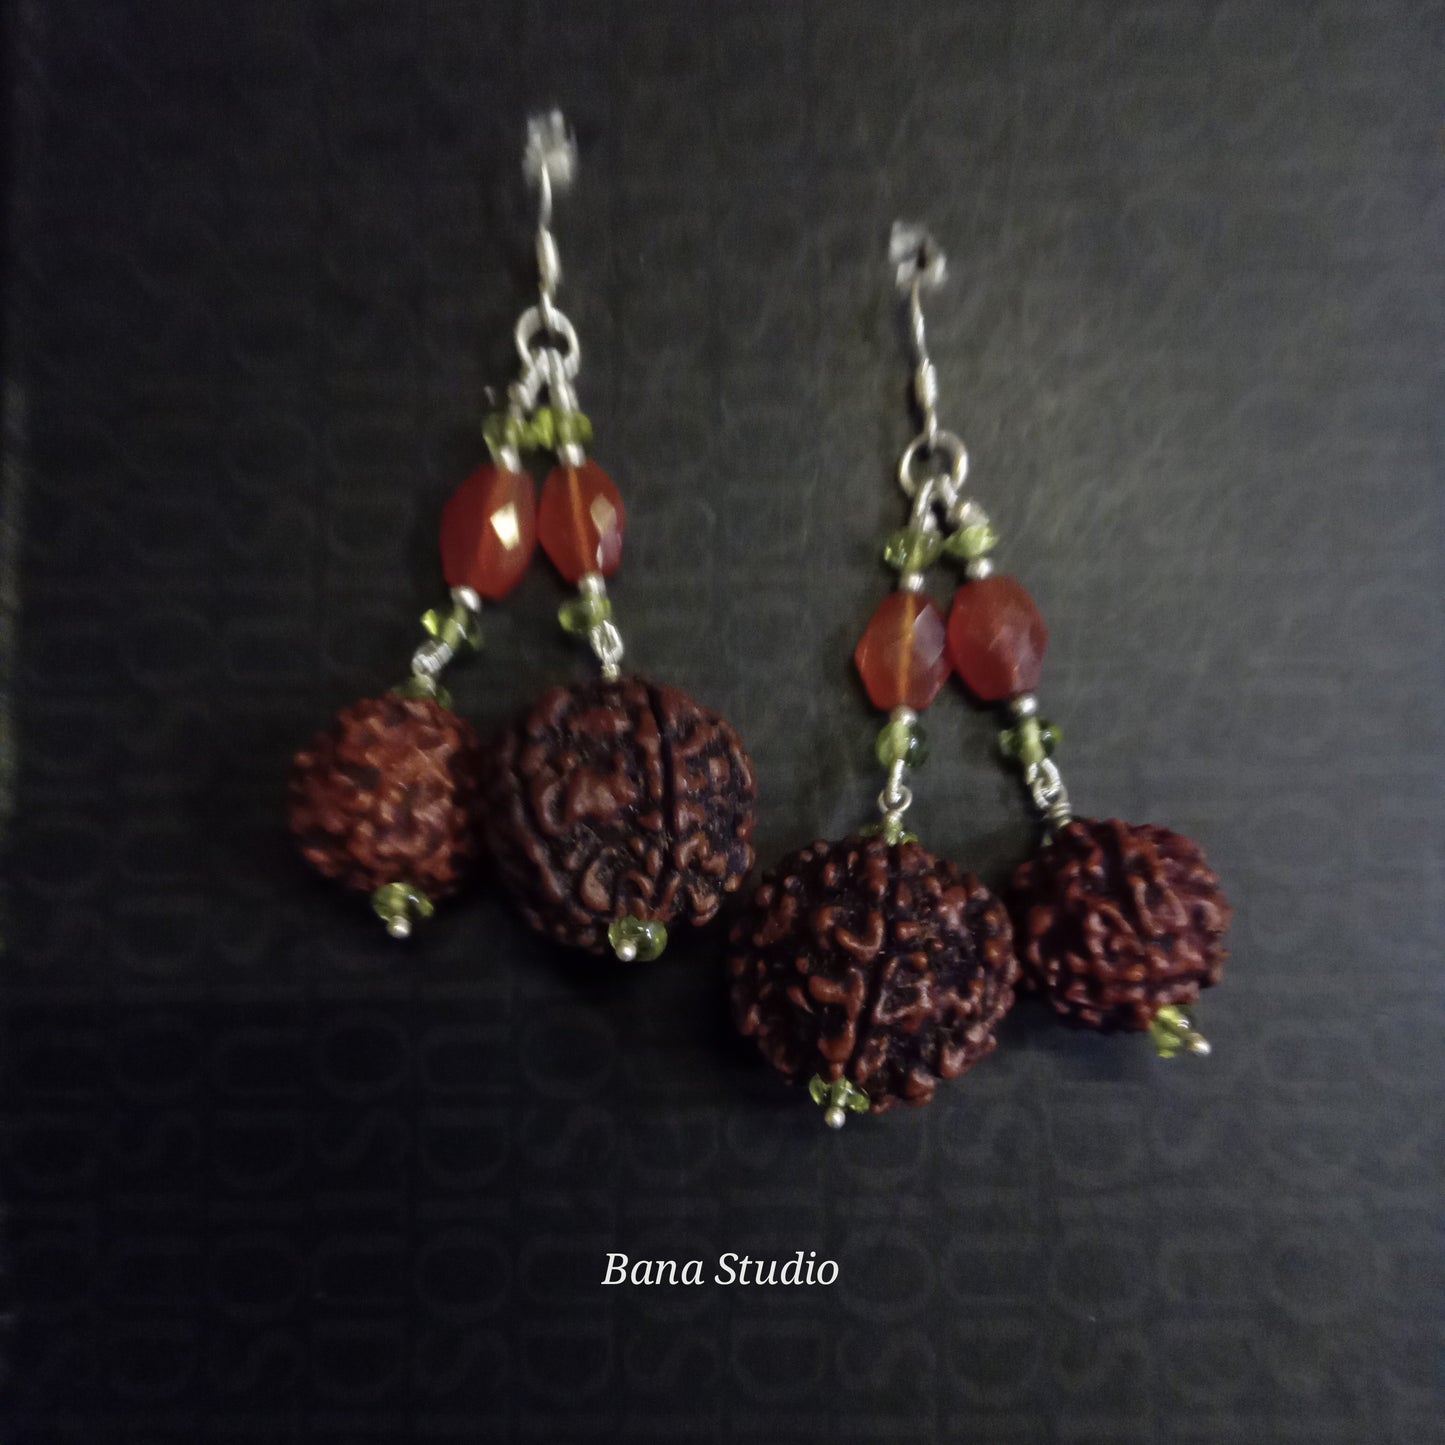 Made up Earrings